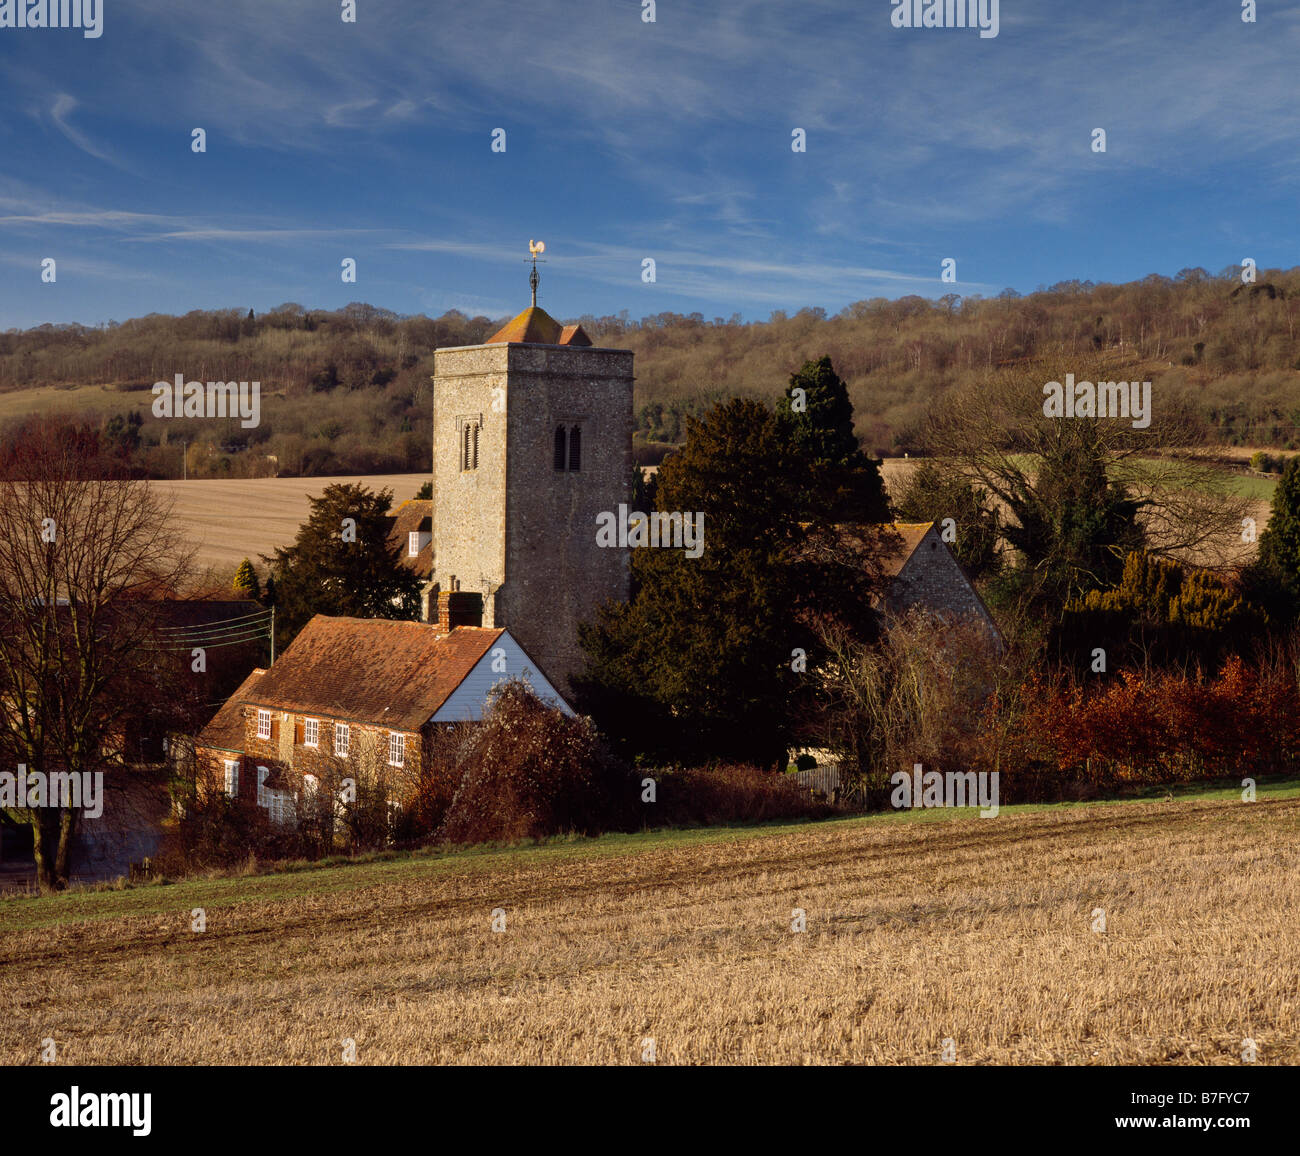 The church of St Peter St Paul Trottiscliffe, West Malling, Kent, England, UK. Stock Photo